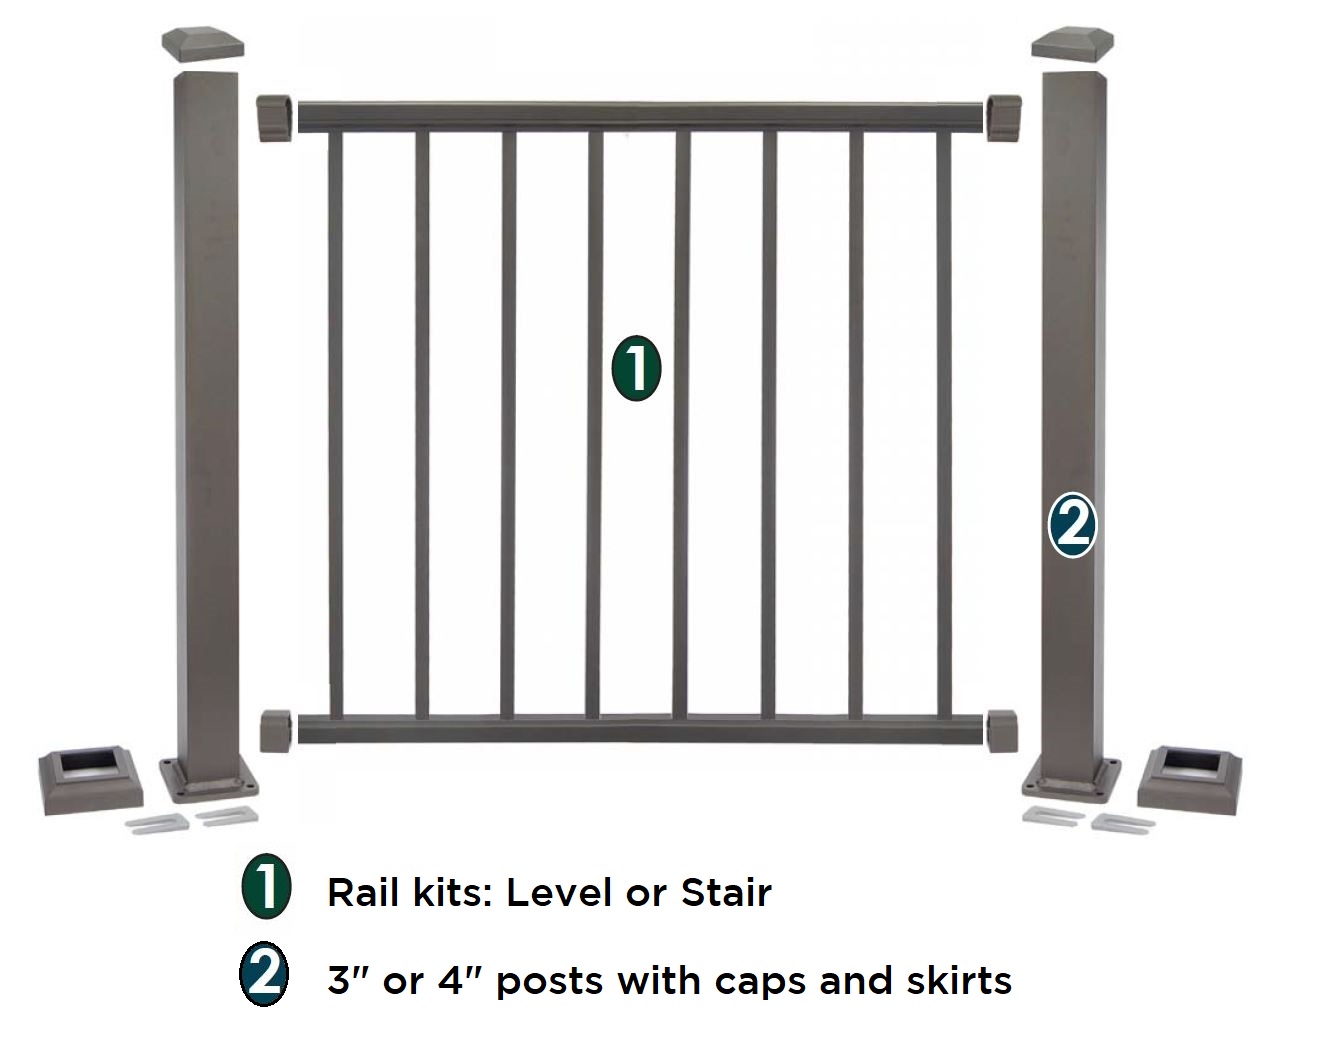 Exploded view of aluminum railing